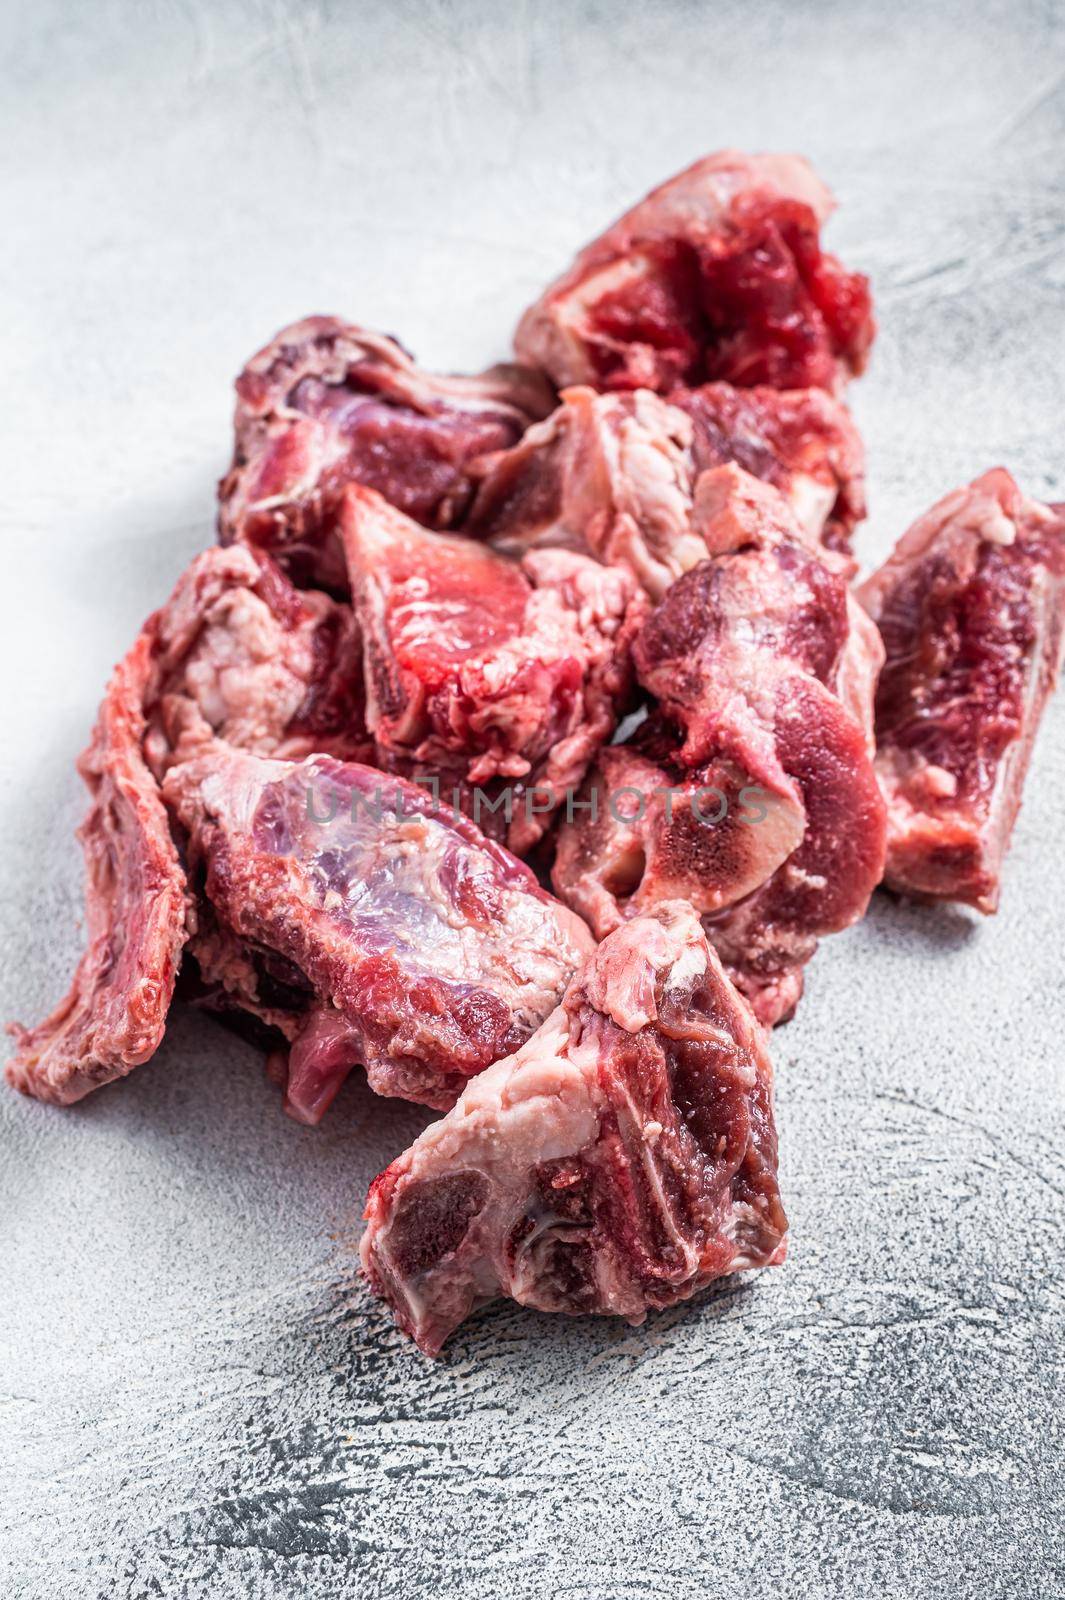 Raw lamb meat stew cuts with bone. White background. Top view by Composter